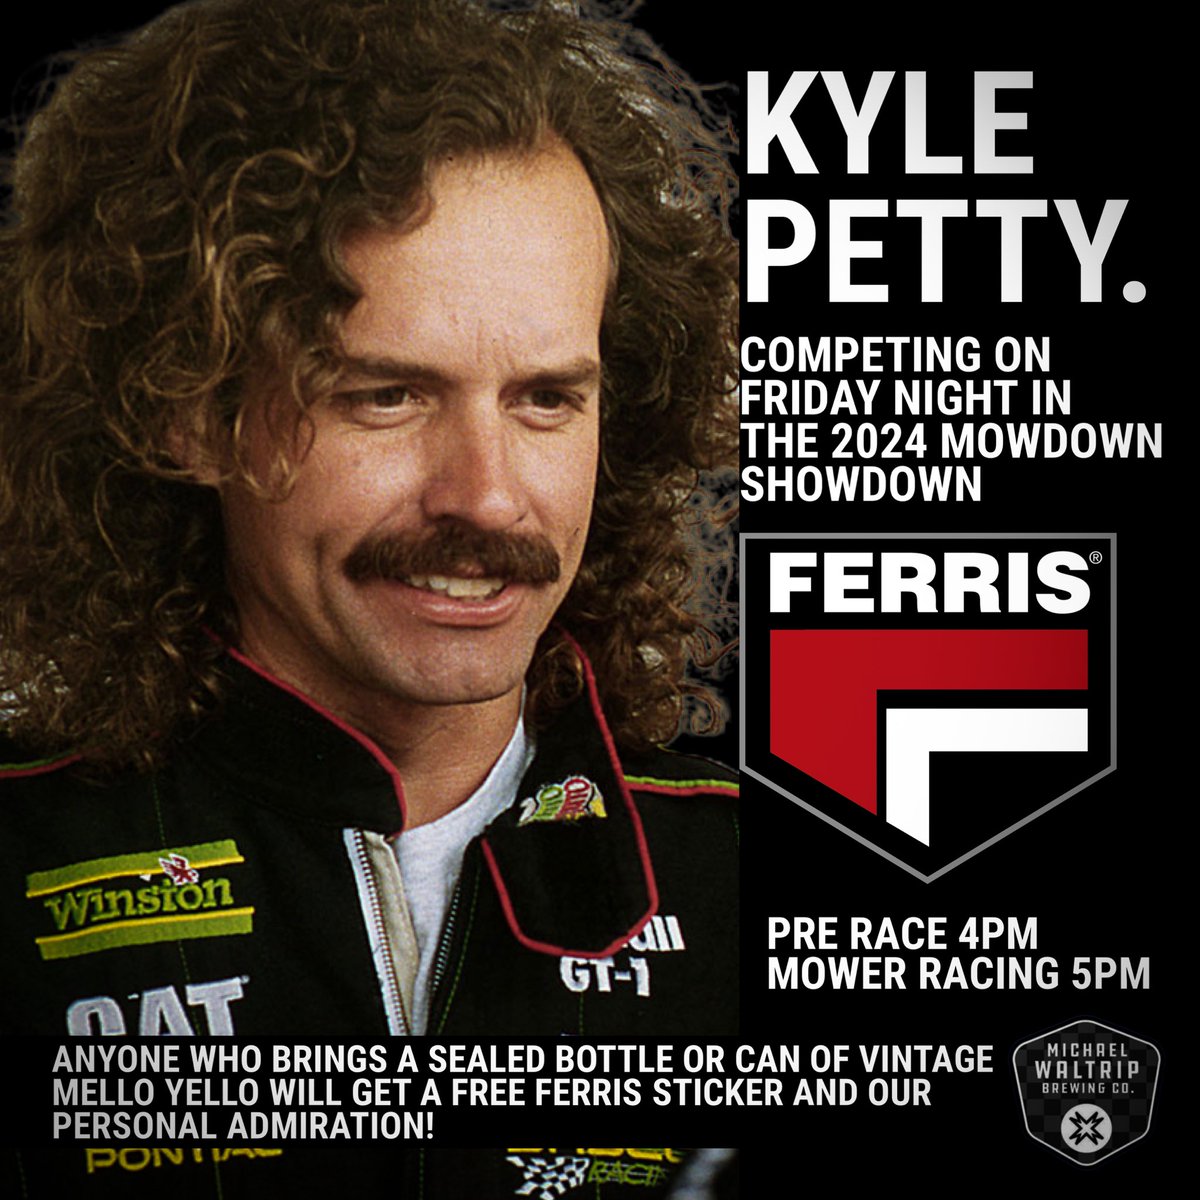 Come hang with us this Friday 3/15 as @kylepetty straps into a Ferris Mower for the 2024 Ferris Mowdown Showdown at @WaltripBrewing in Bristol!